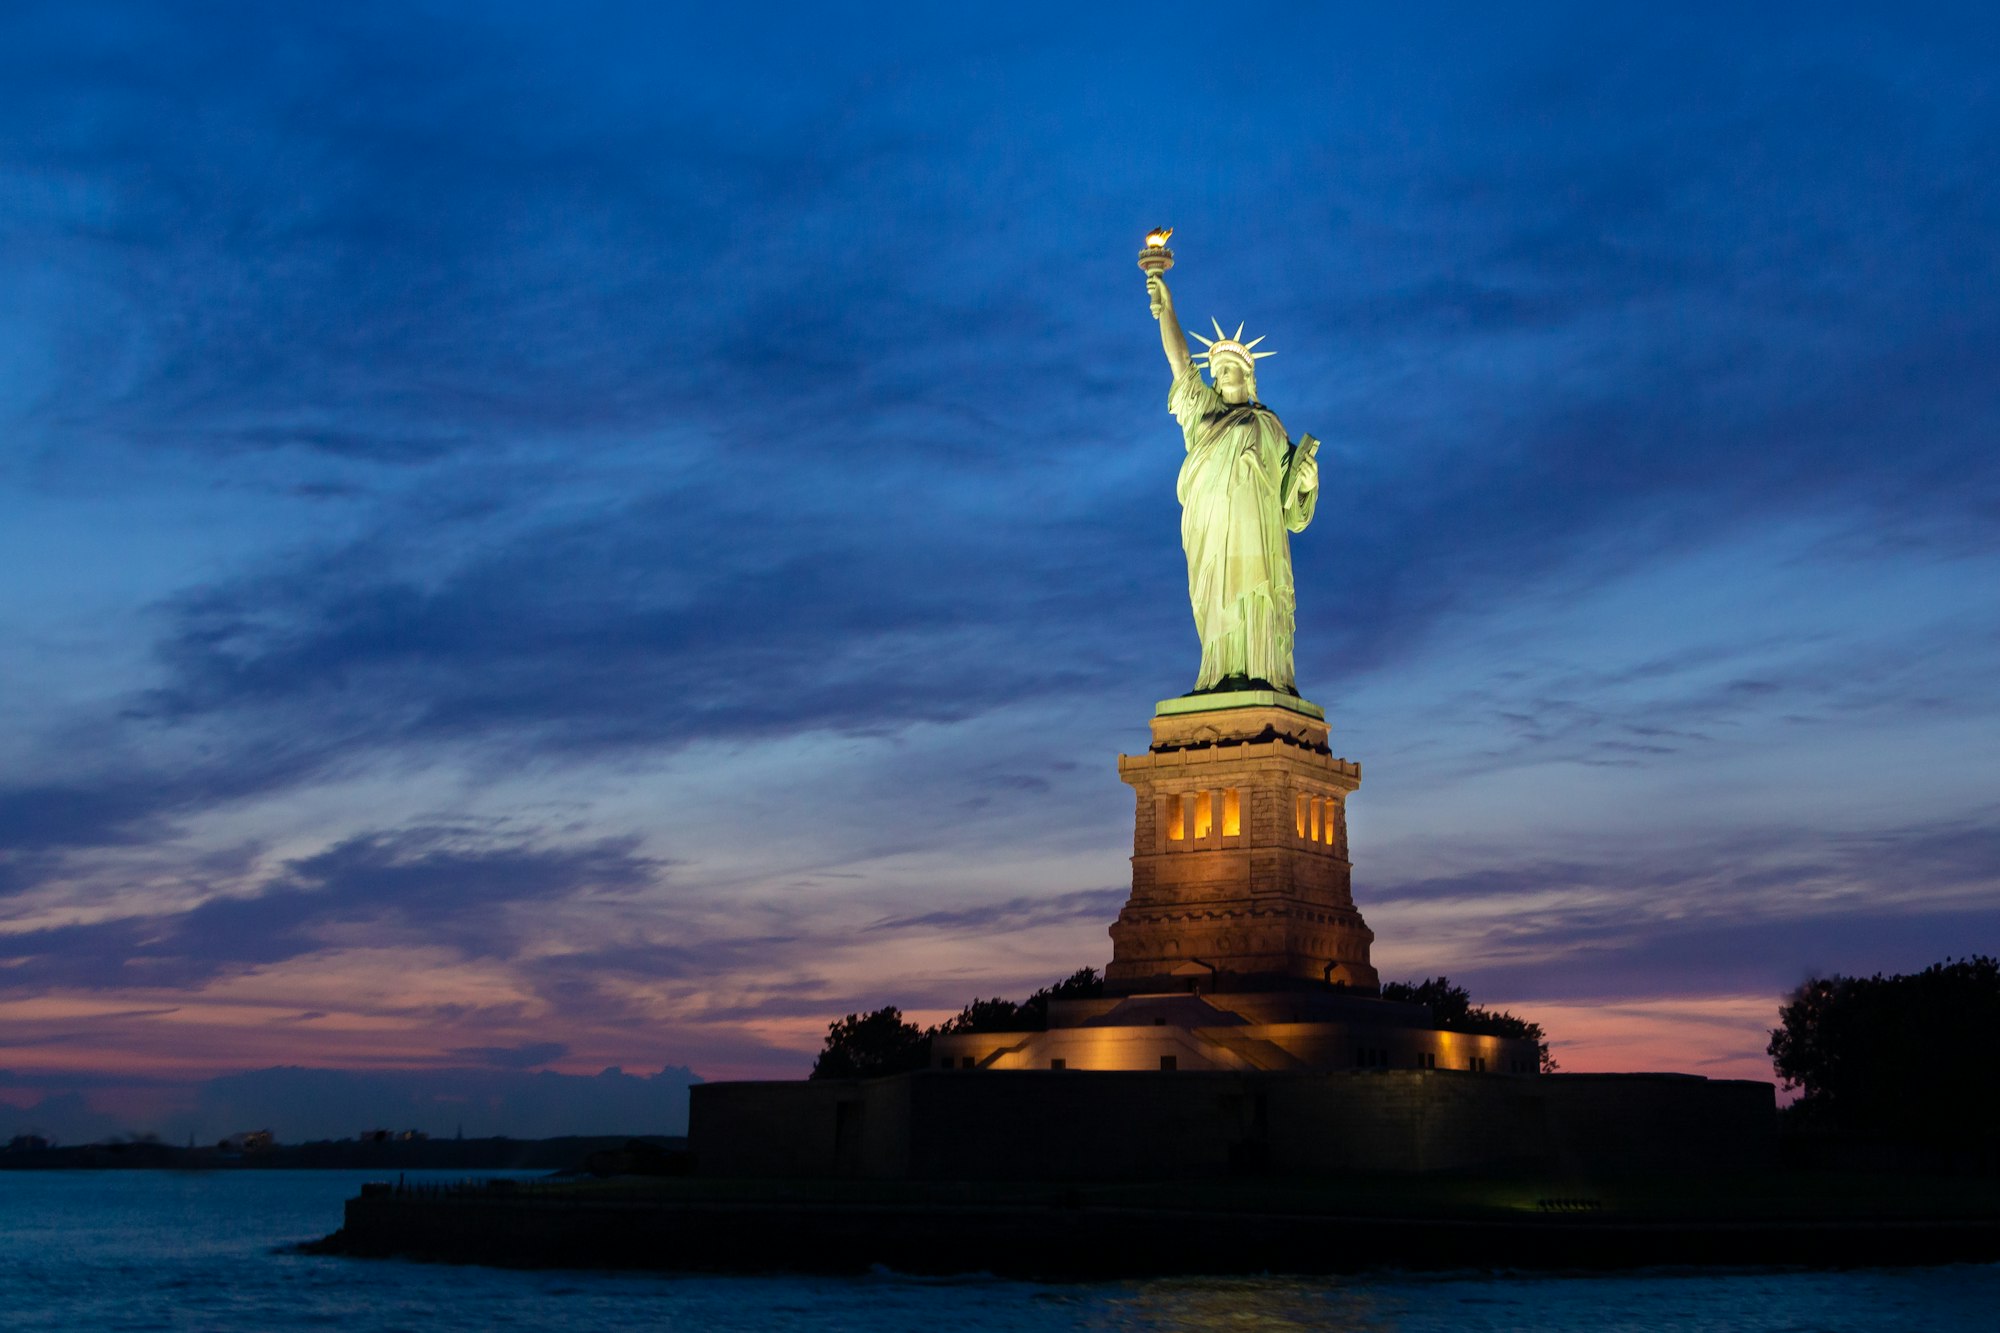 Where Is The Statue Of Liberty Located?